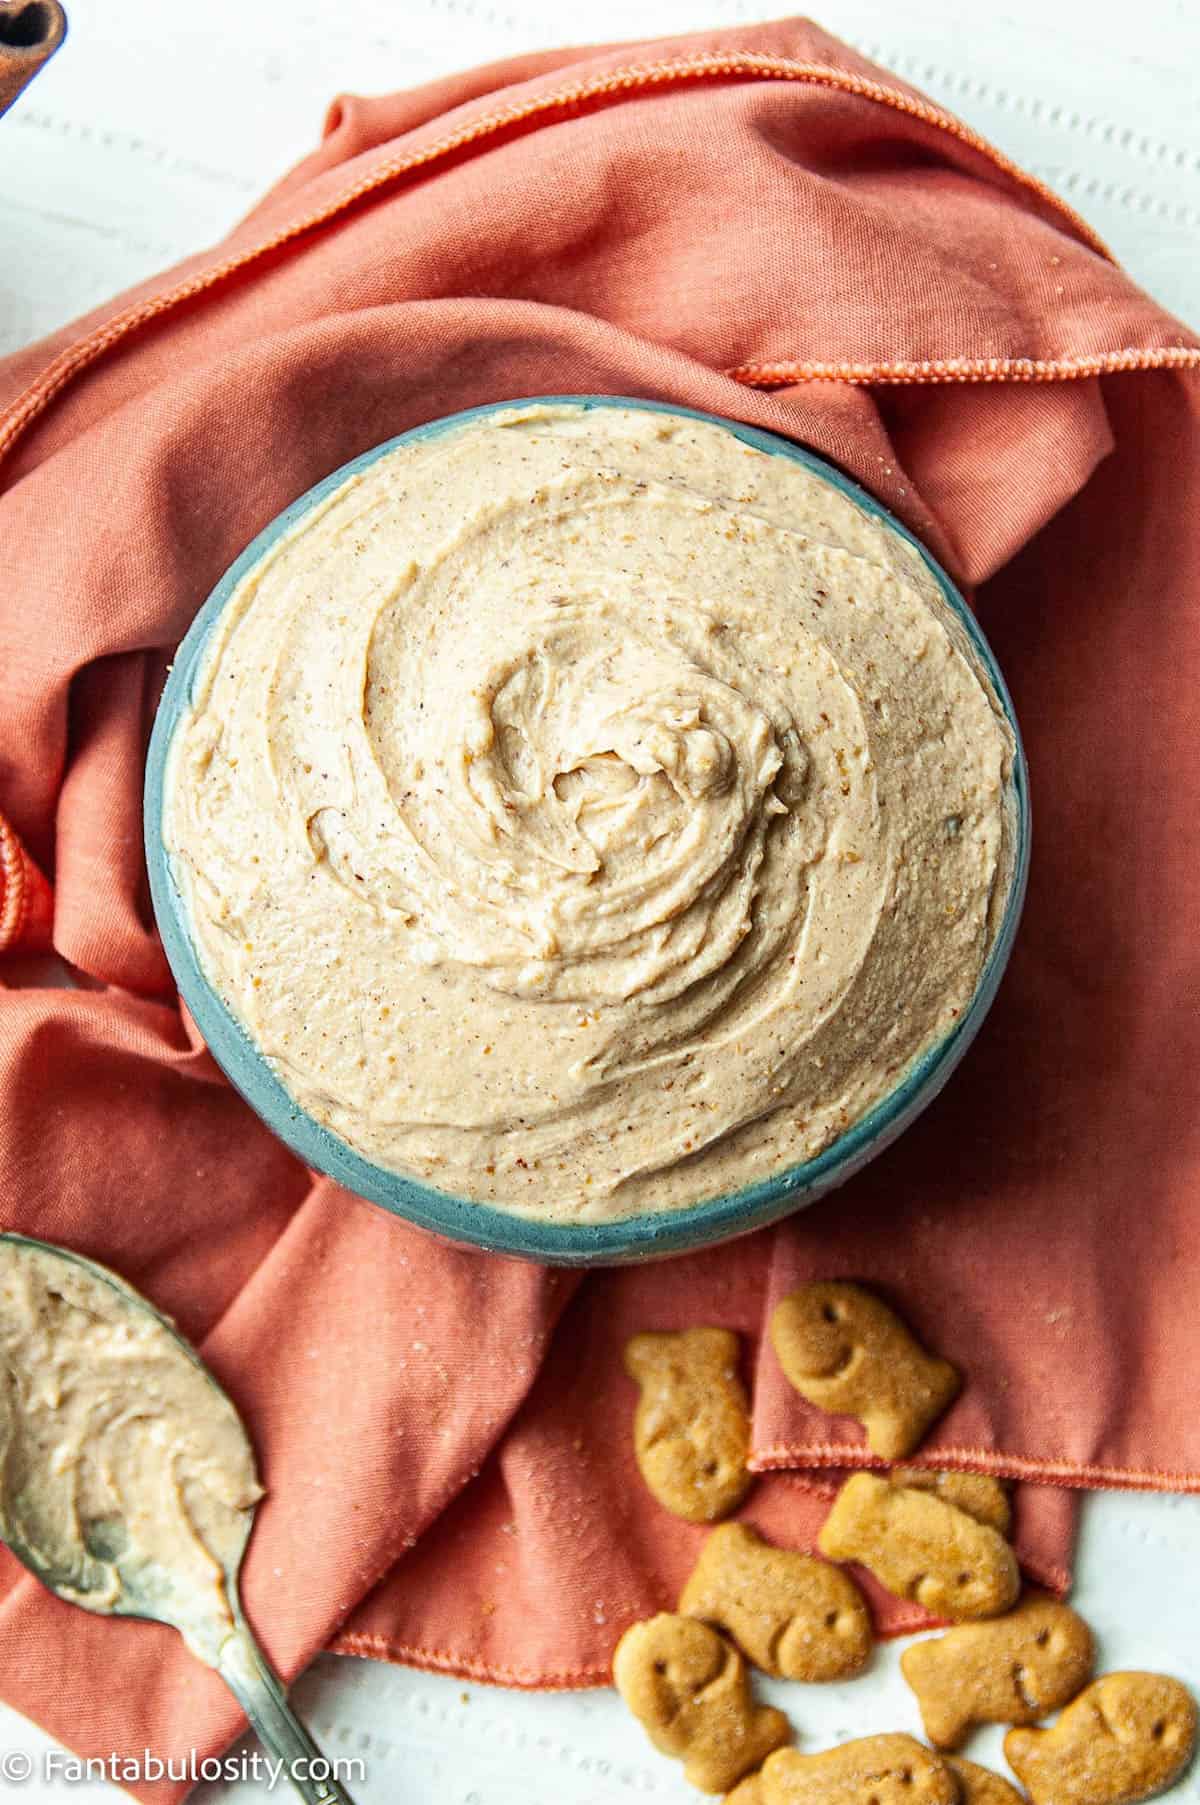 Creamy peanut butter yogurt dip is shown in the center of the photo on an orange background. There is a spoon on the left and graham crackers for dipping on the right.